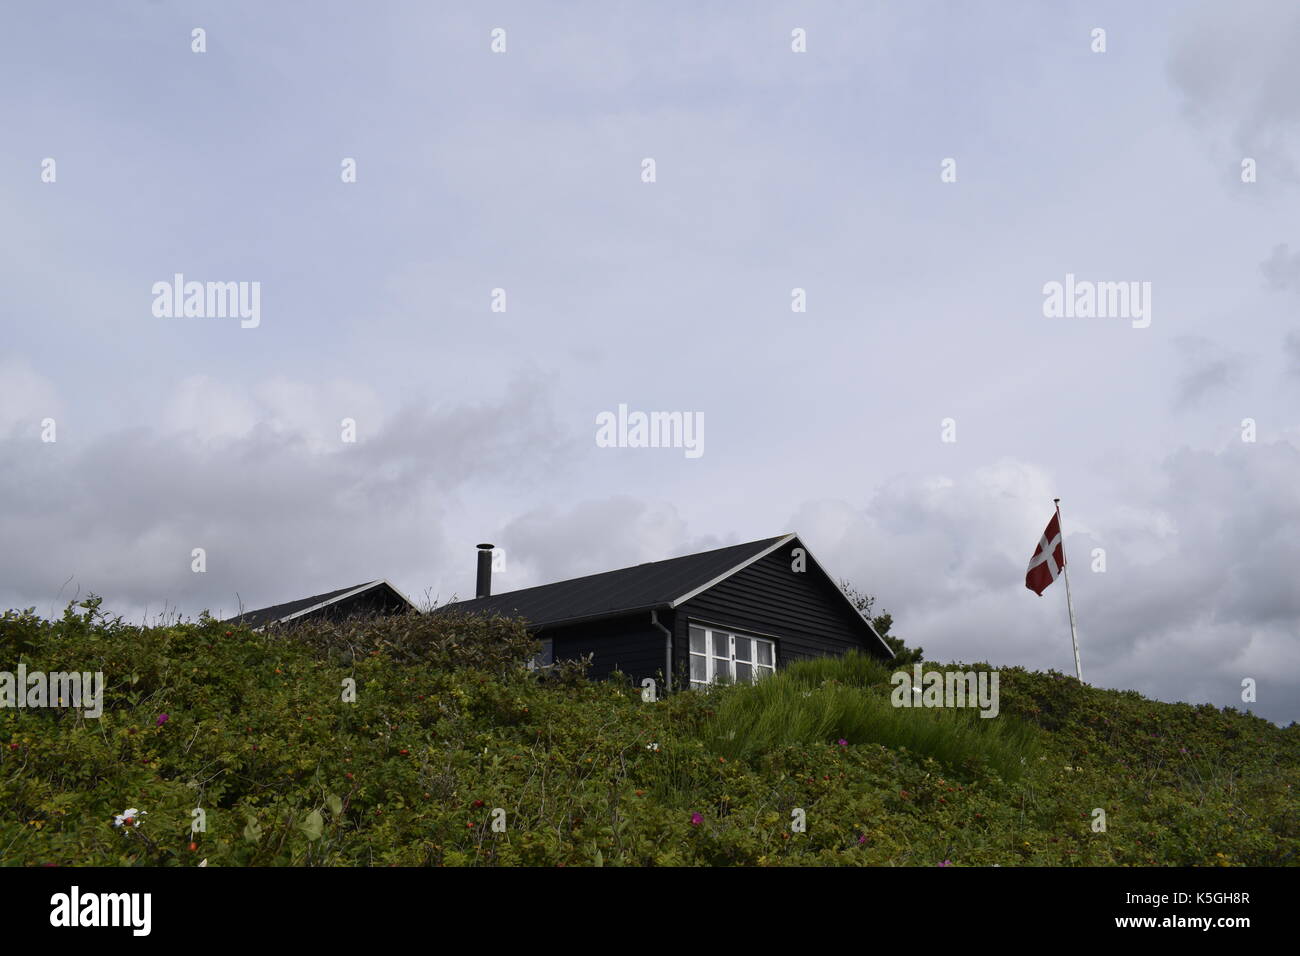 The Dannebrog, the Danish flag, is hoisted next to a holiday home in Henne Strand, Denmark, 18 August 2017. - NO WIRE SERVICE - Photo: Tim Brakemeier/dpa-Zentralbild/ZB Stock Photo